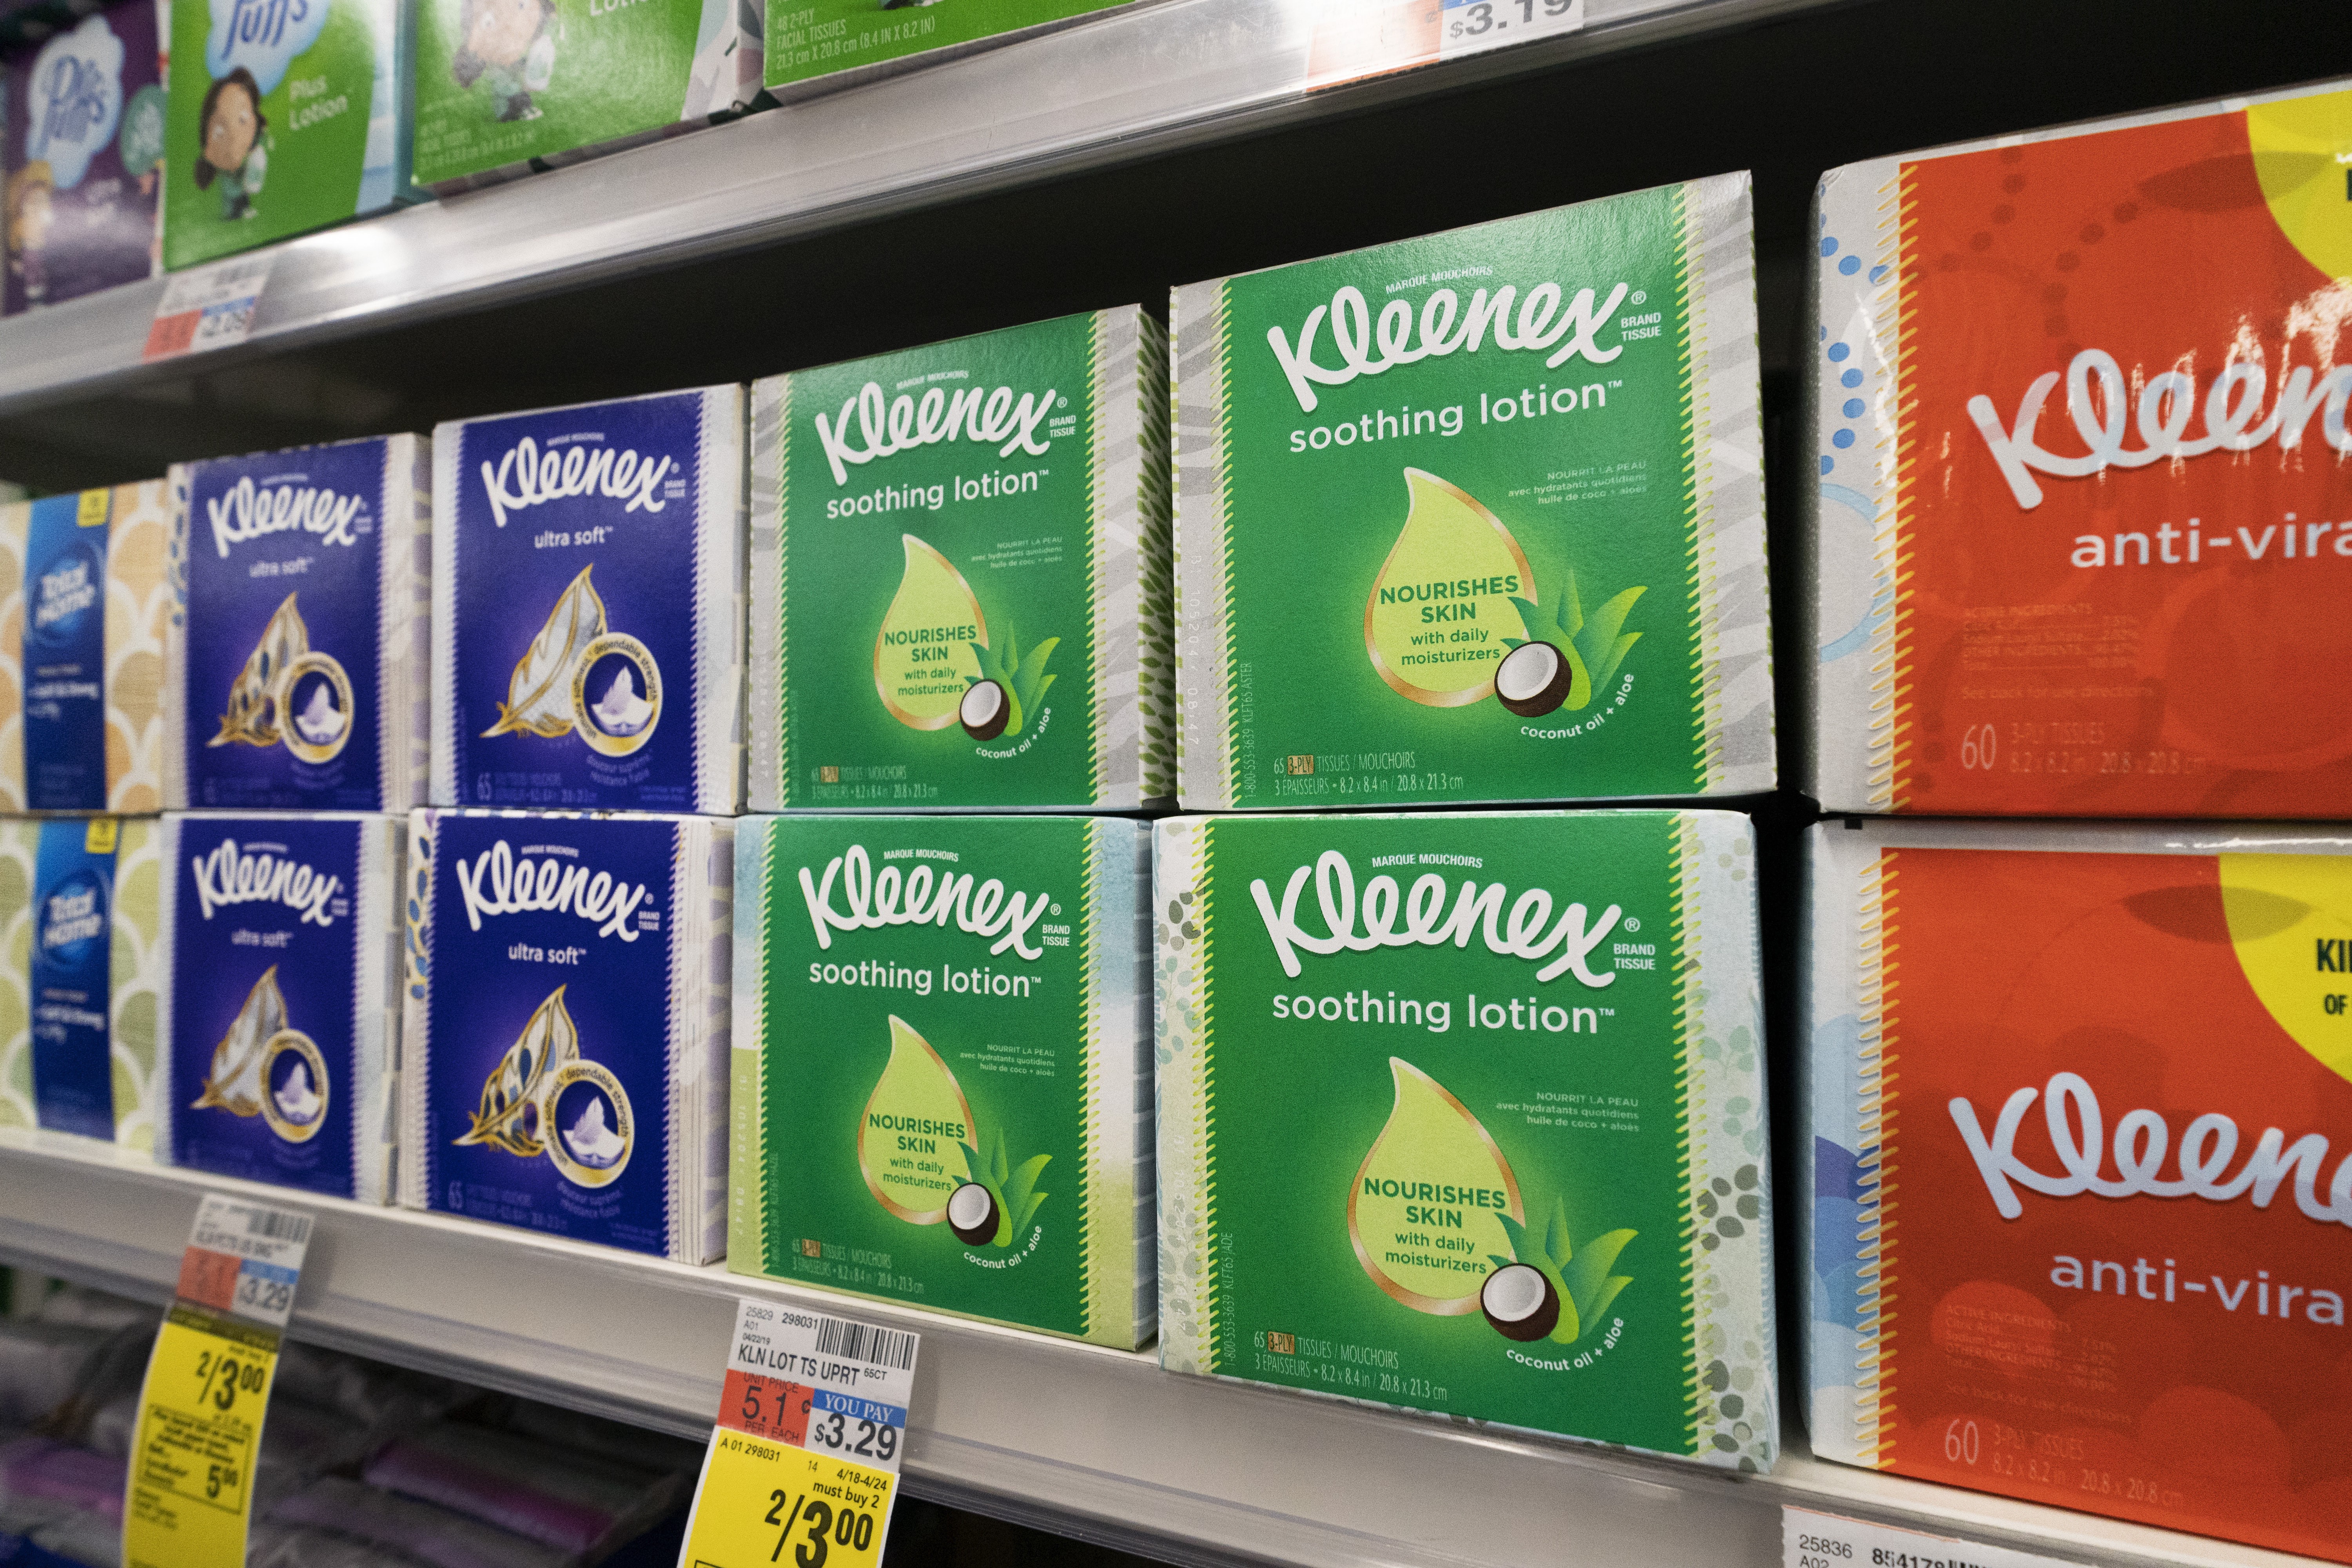 Kleenex pulling out of Canada, Kimberly-Clark says - The Globe and Mail